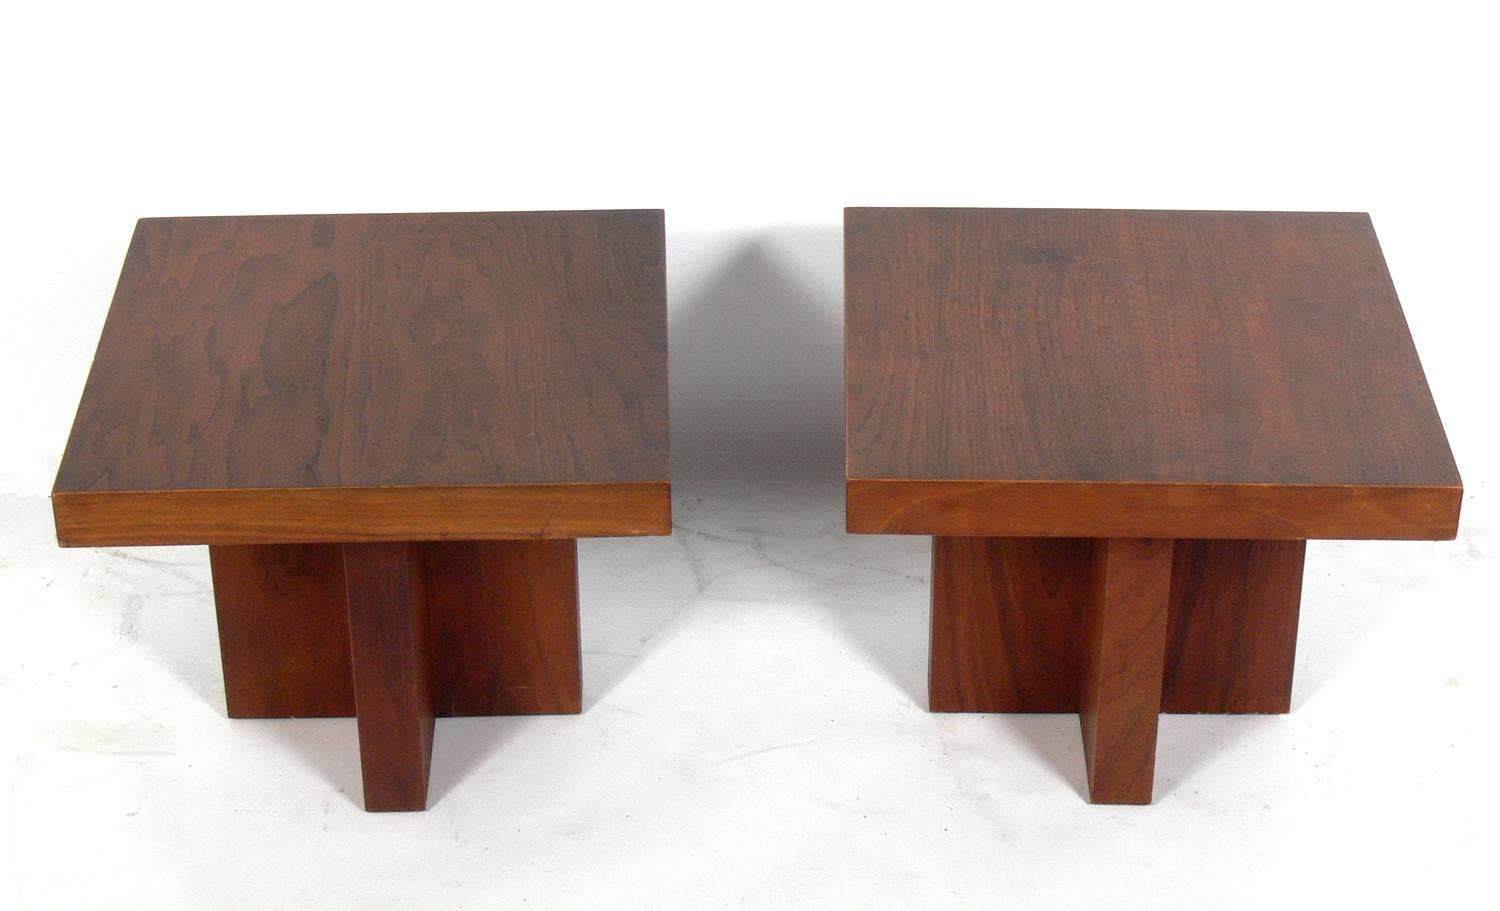 Pair of clean lined walnut end tables, designed by Milo Baughman for Thayer Coggin, American, circa 1960s. These tables have a clean lined architectural design and can be used as end or side tables, night stands, or pushed together to be used as a